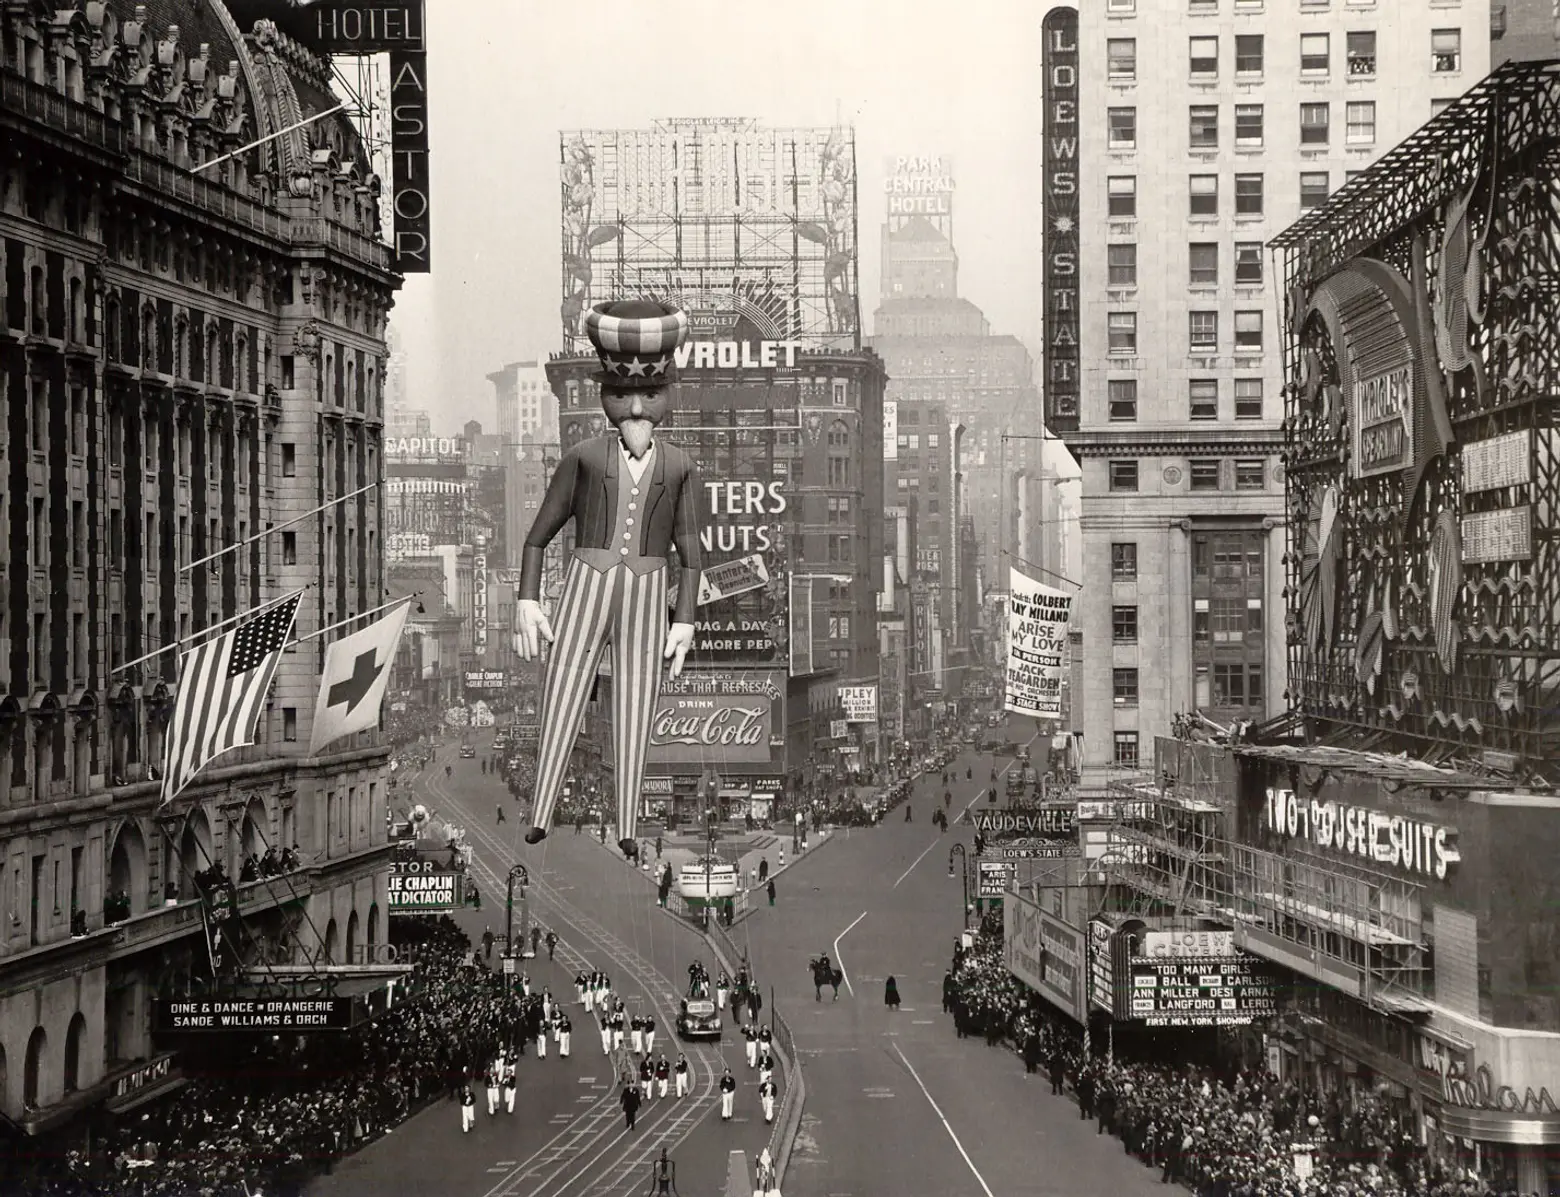 thanksgiving day parade, macy's,